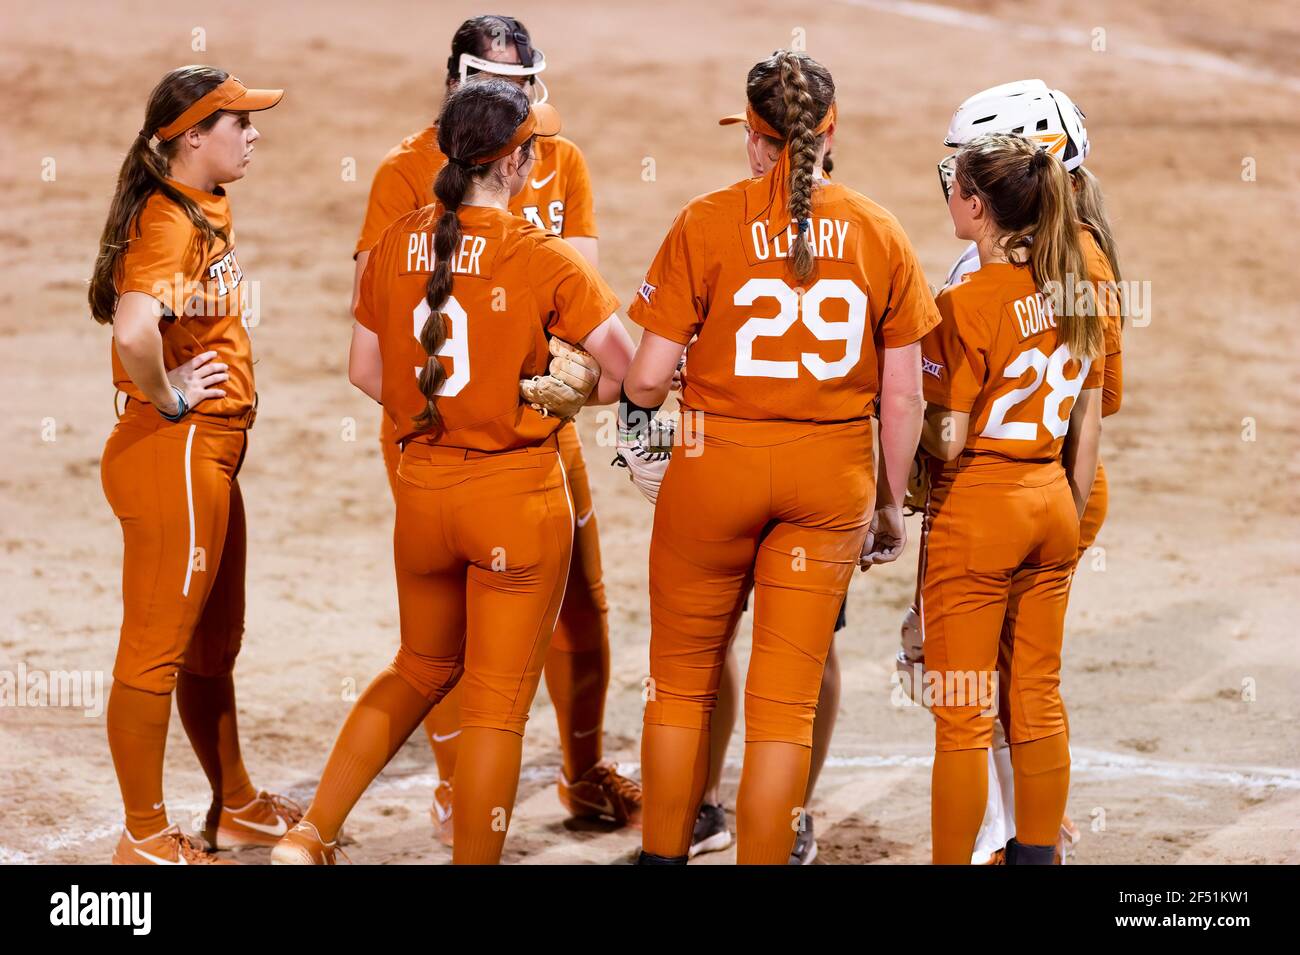 The Texas Longhorns Woman Softball Team Faces Off Against the Mexican Woman National Team in Tournament play Stock Photo